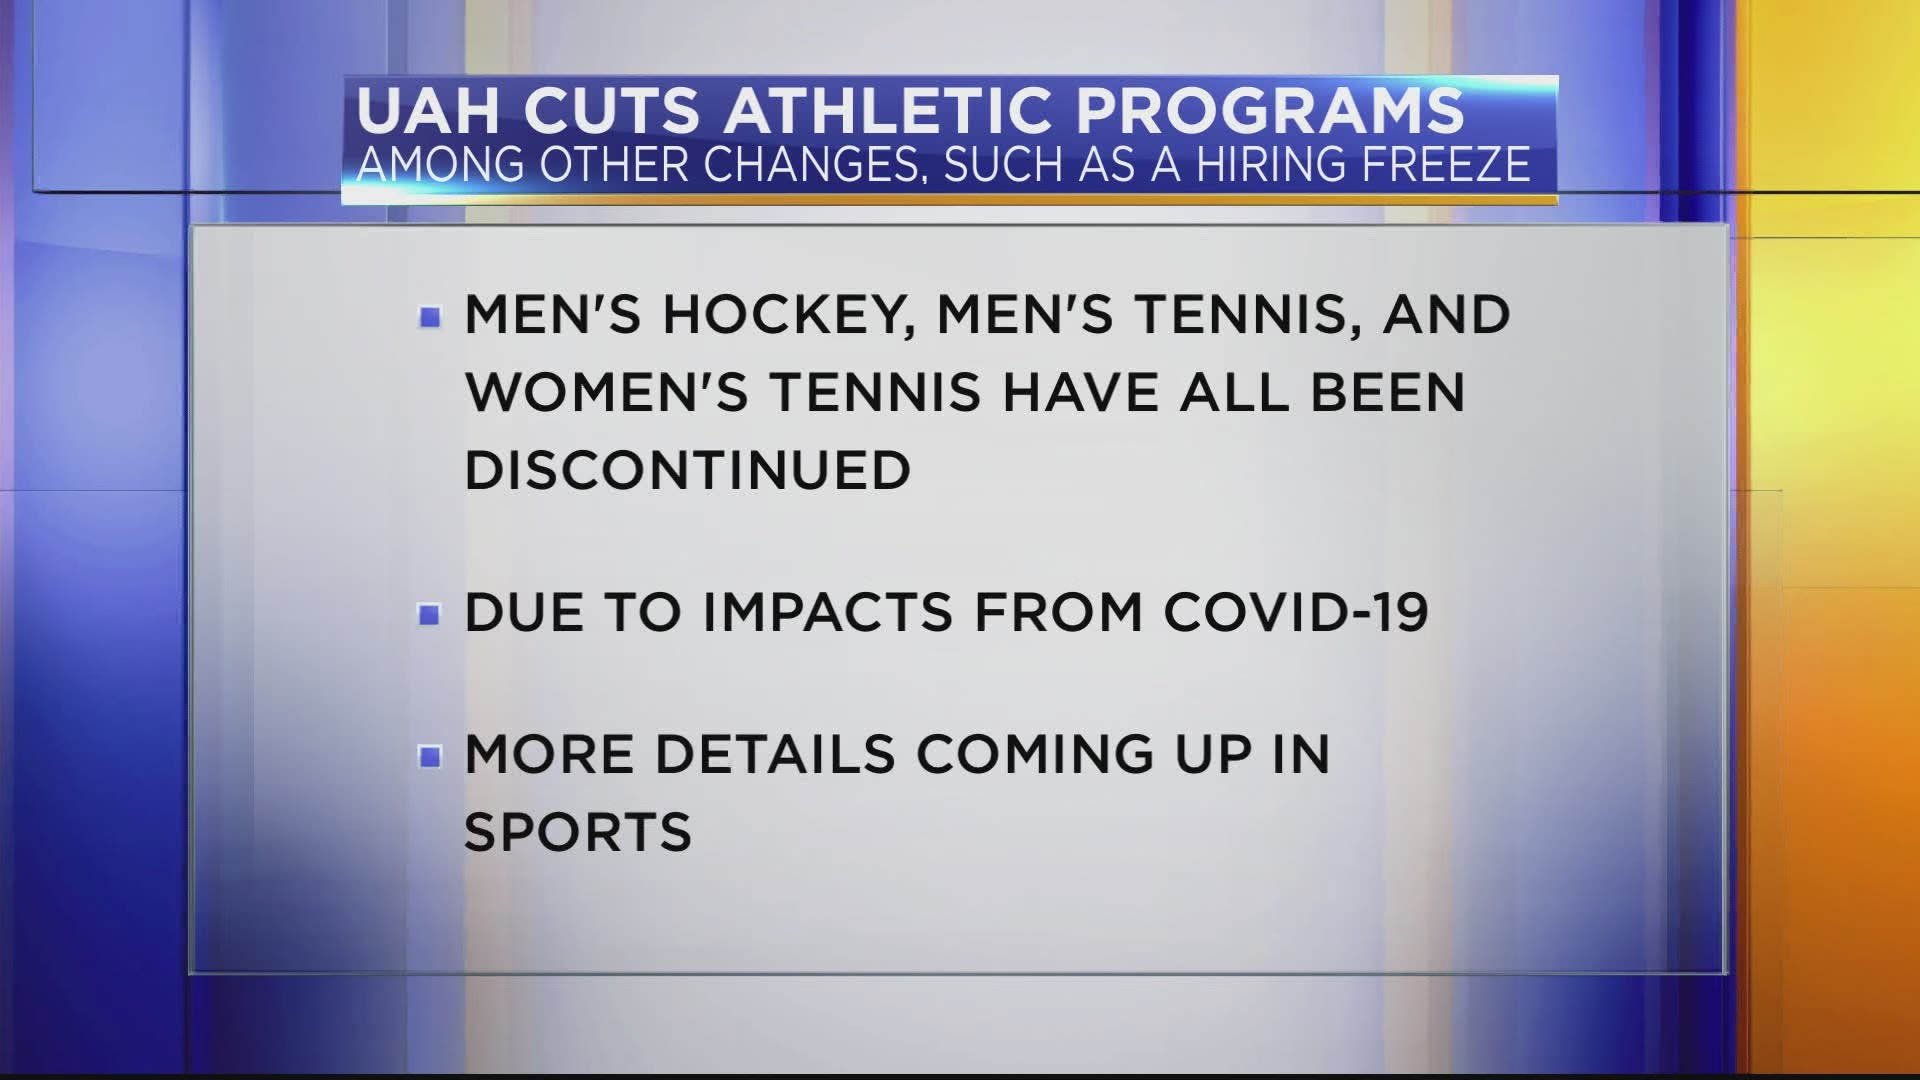 Because of COVID-19, UAH has made the difficult decision to discontinue the men's hockey, men's tennis, and women's tennis programs.